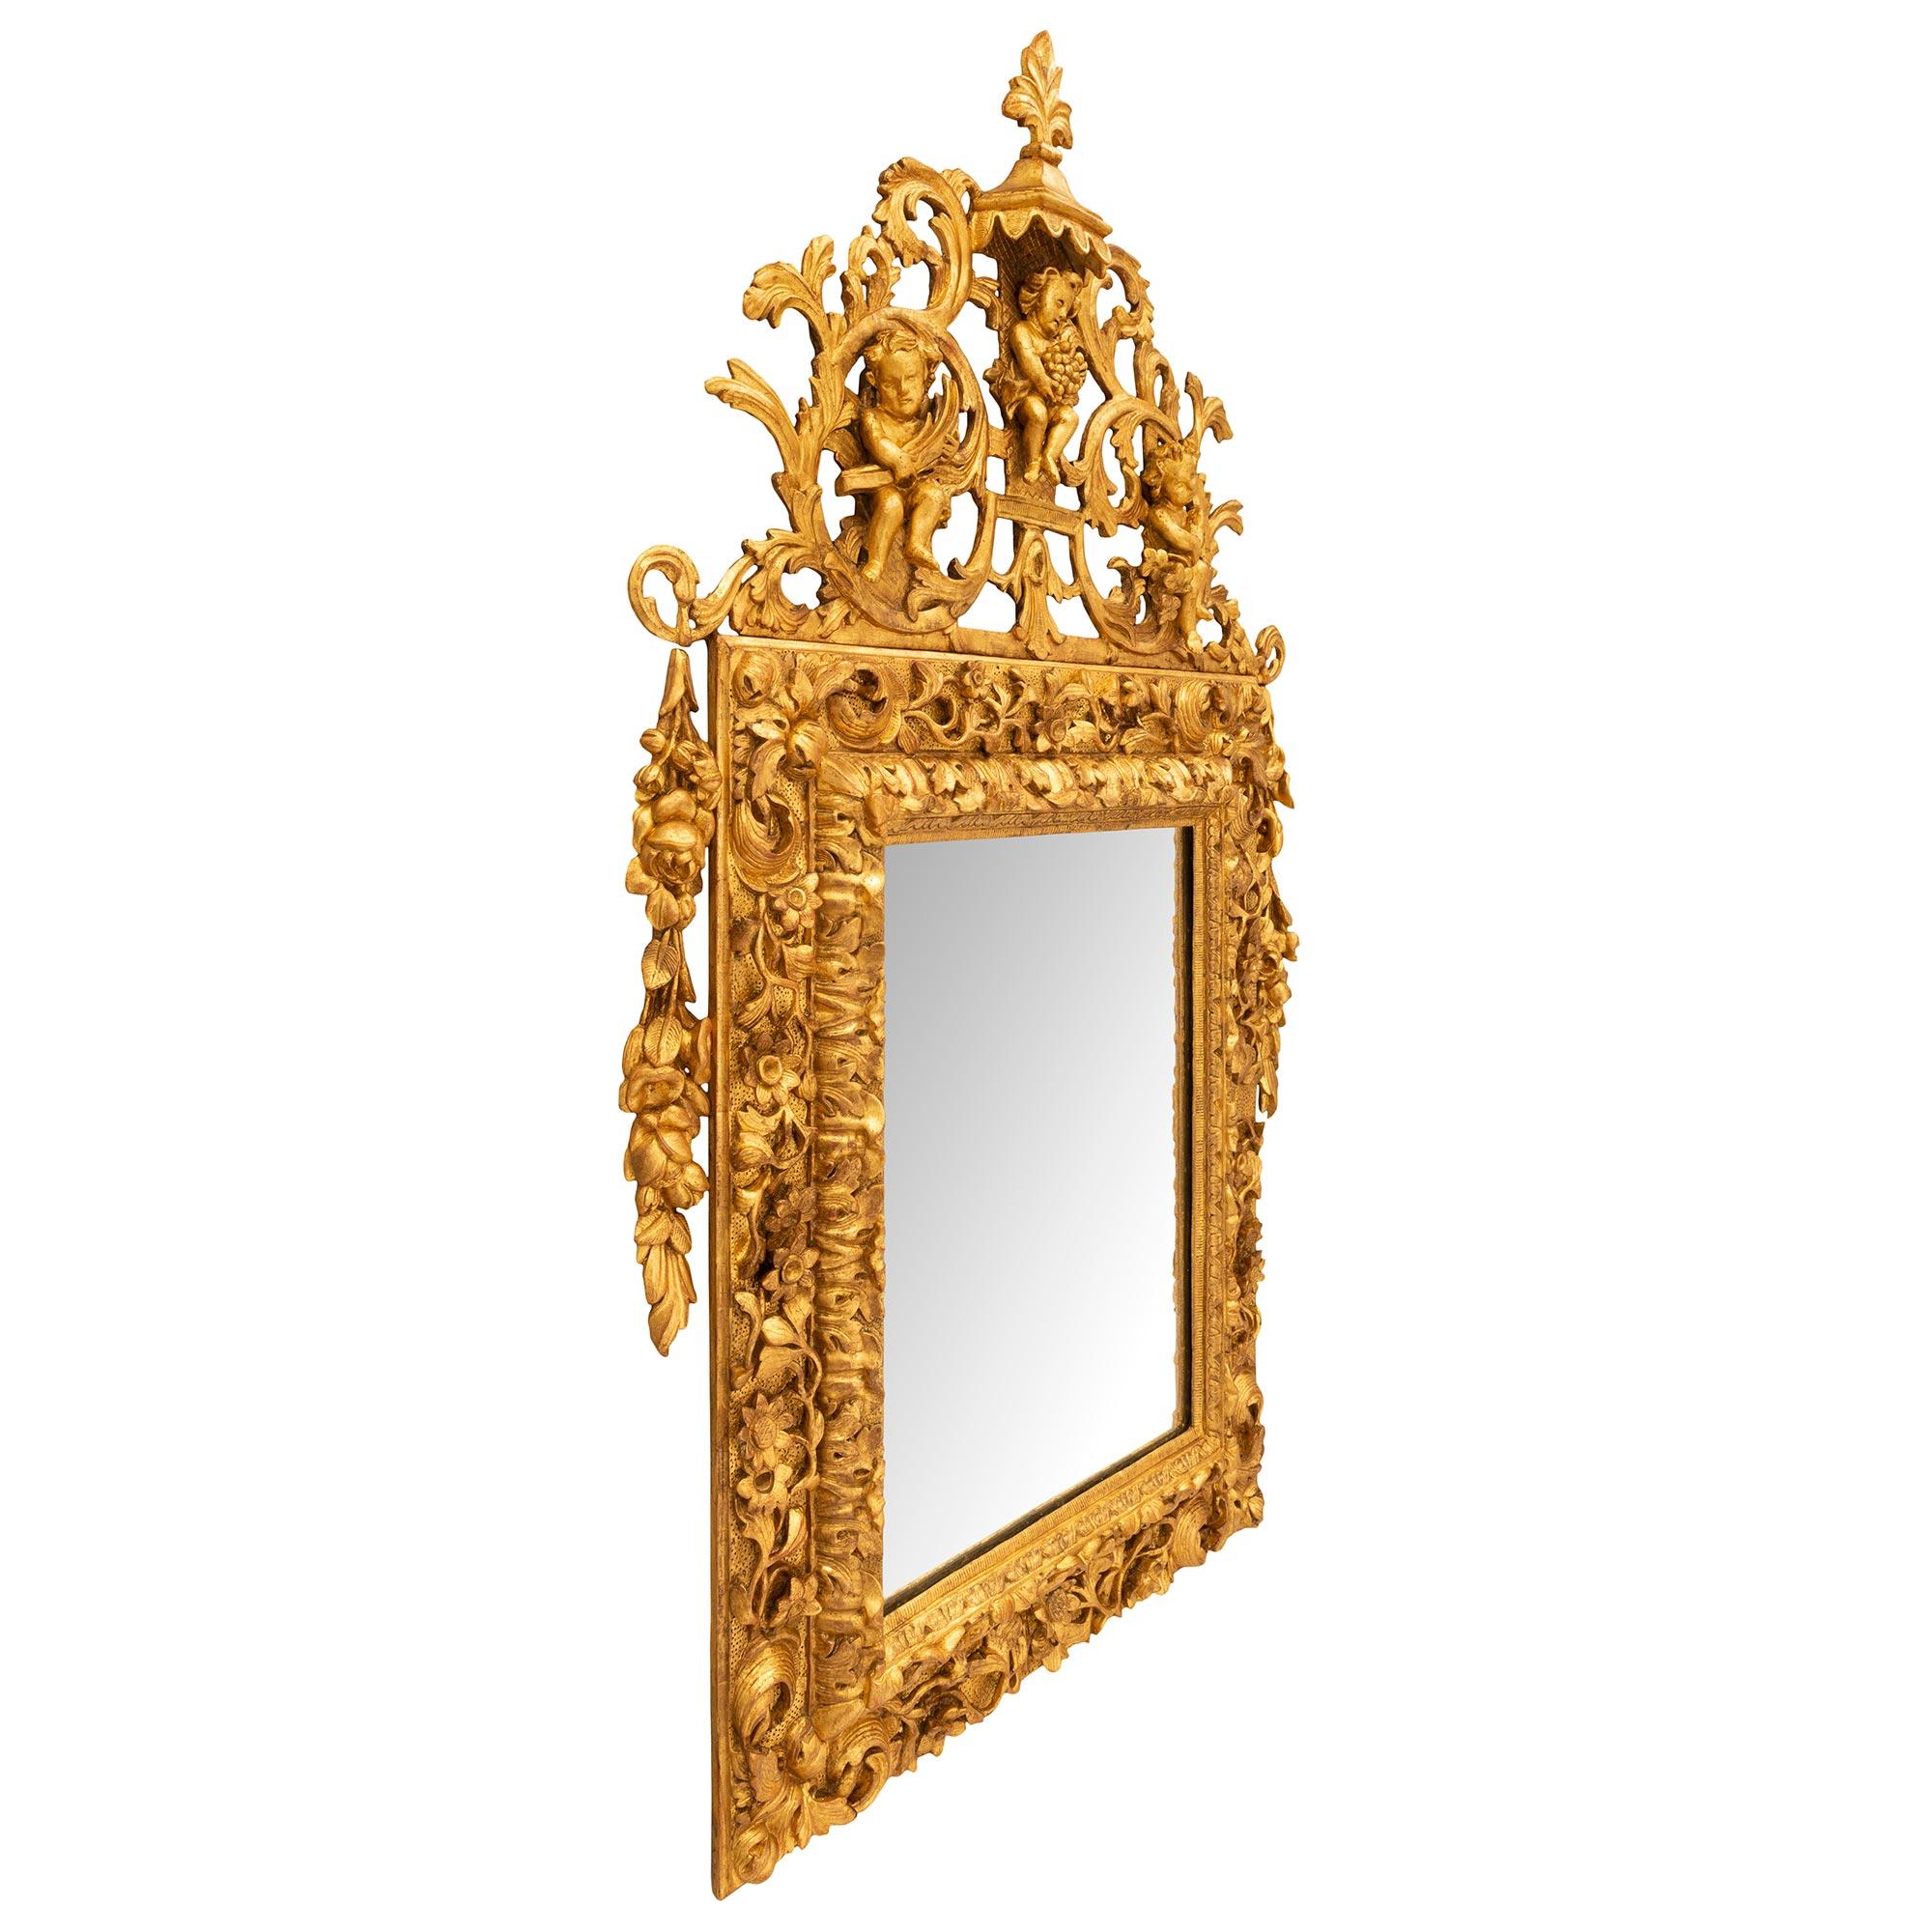 A striking Italian 18th century Baroque period giltwood mirror. The mirror plate at the center is framed within a most elegant mottled border with beautiful richly chased foliate designs and lovely intricately detailed blooming flowers amidst